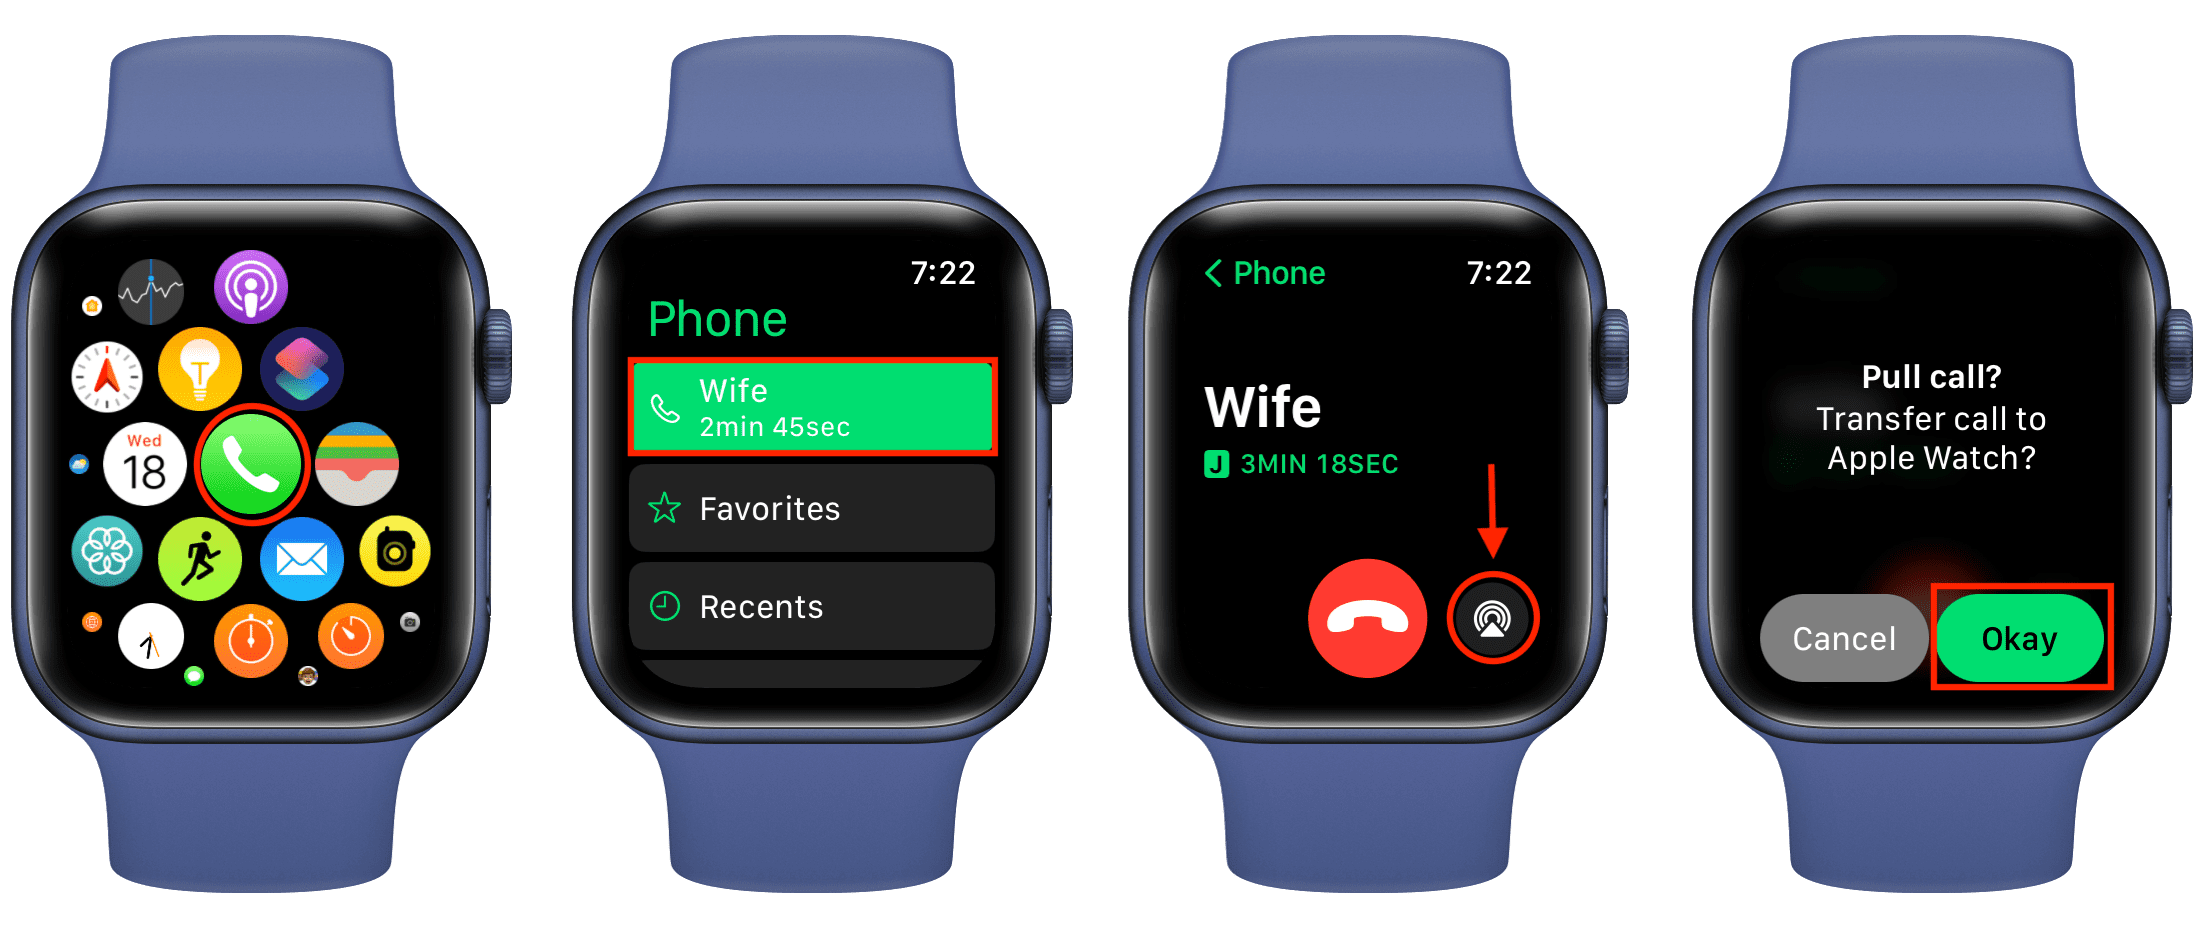 Transfer phone call from iPhone to Apple Watch